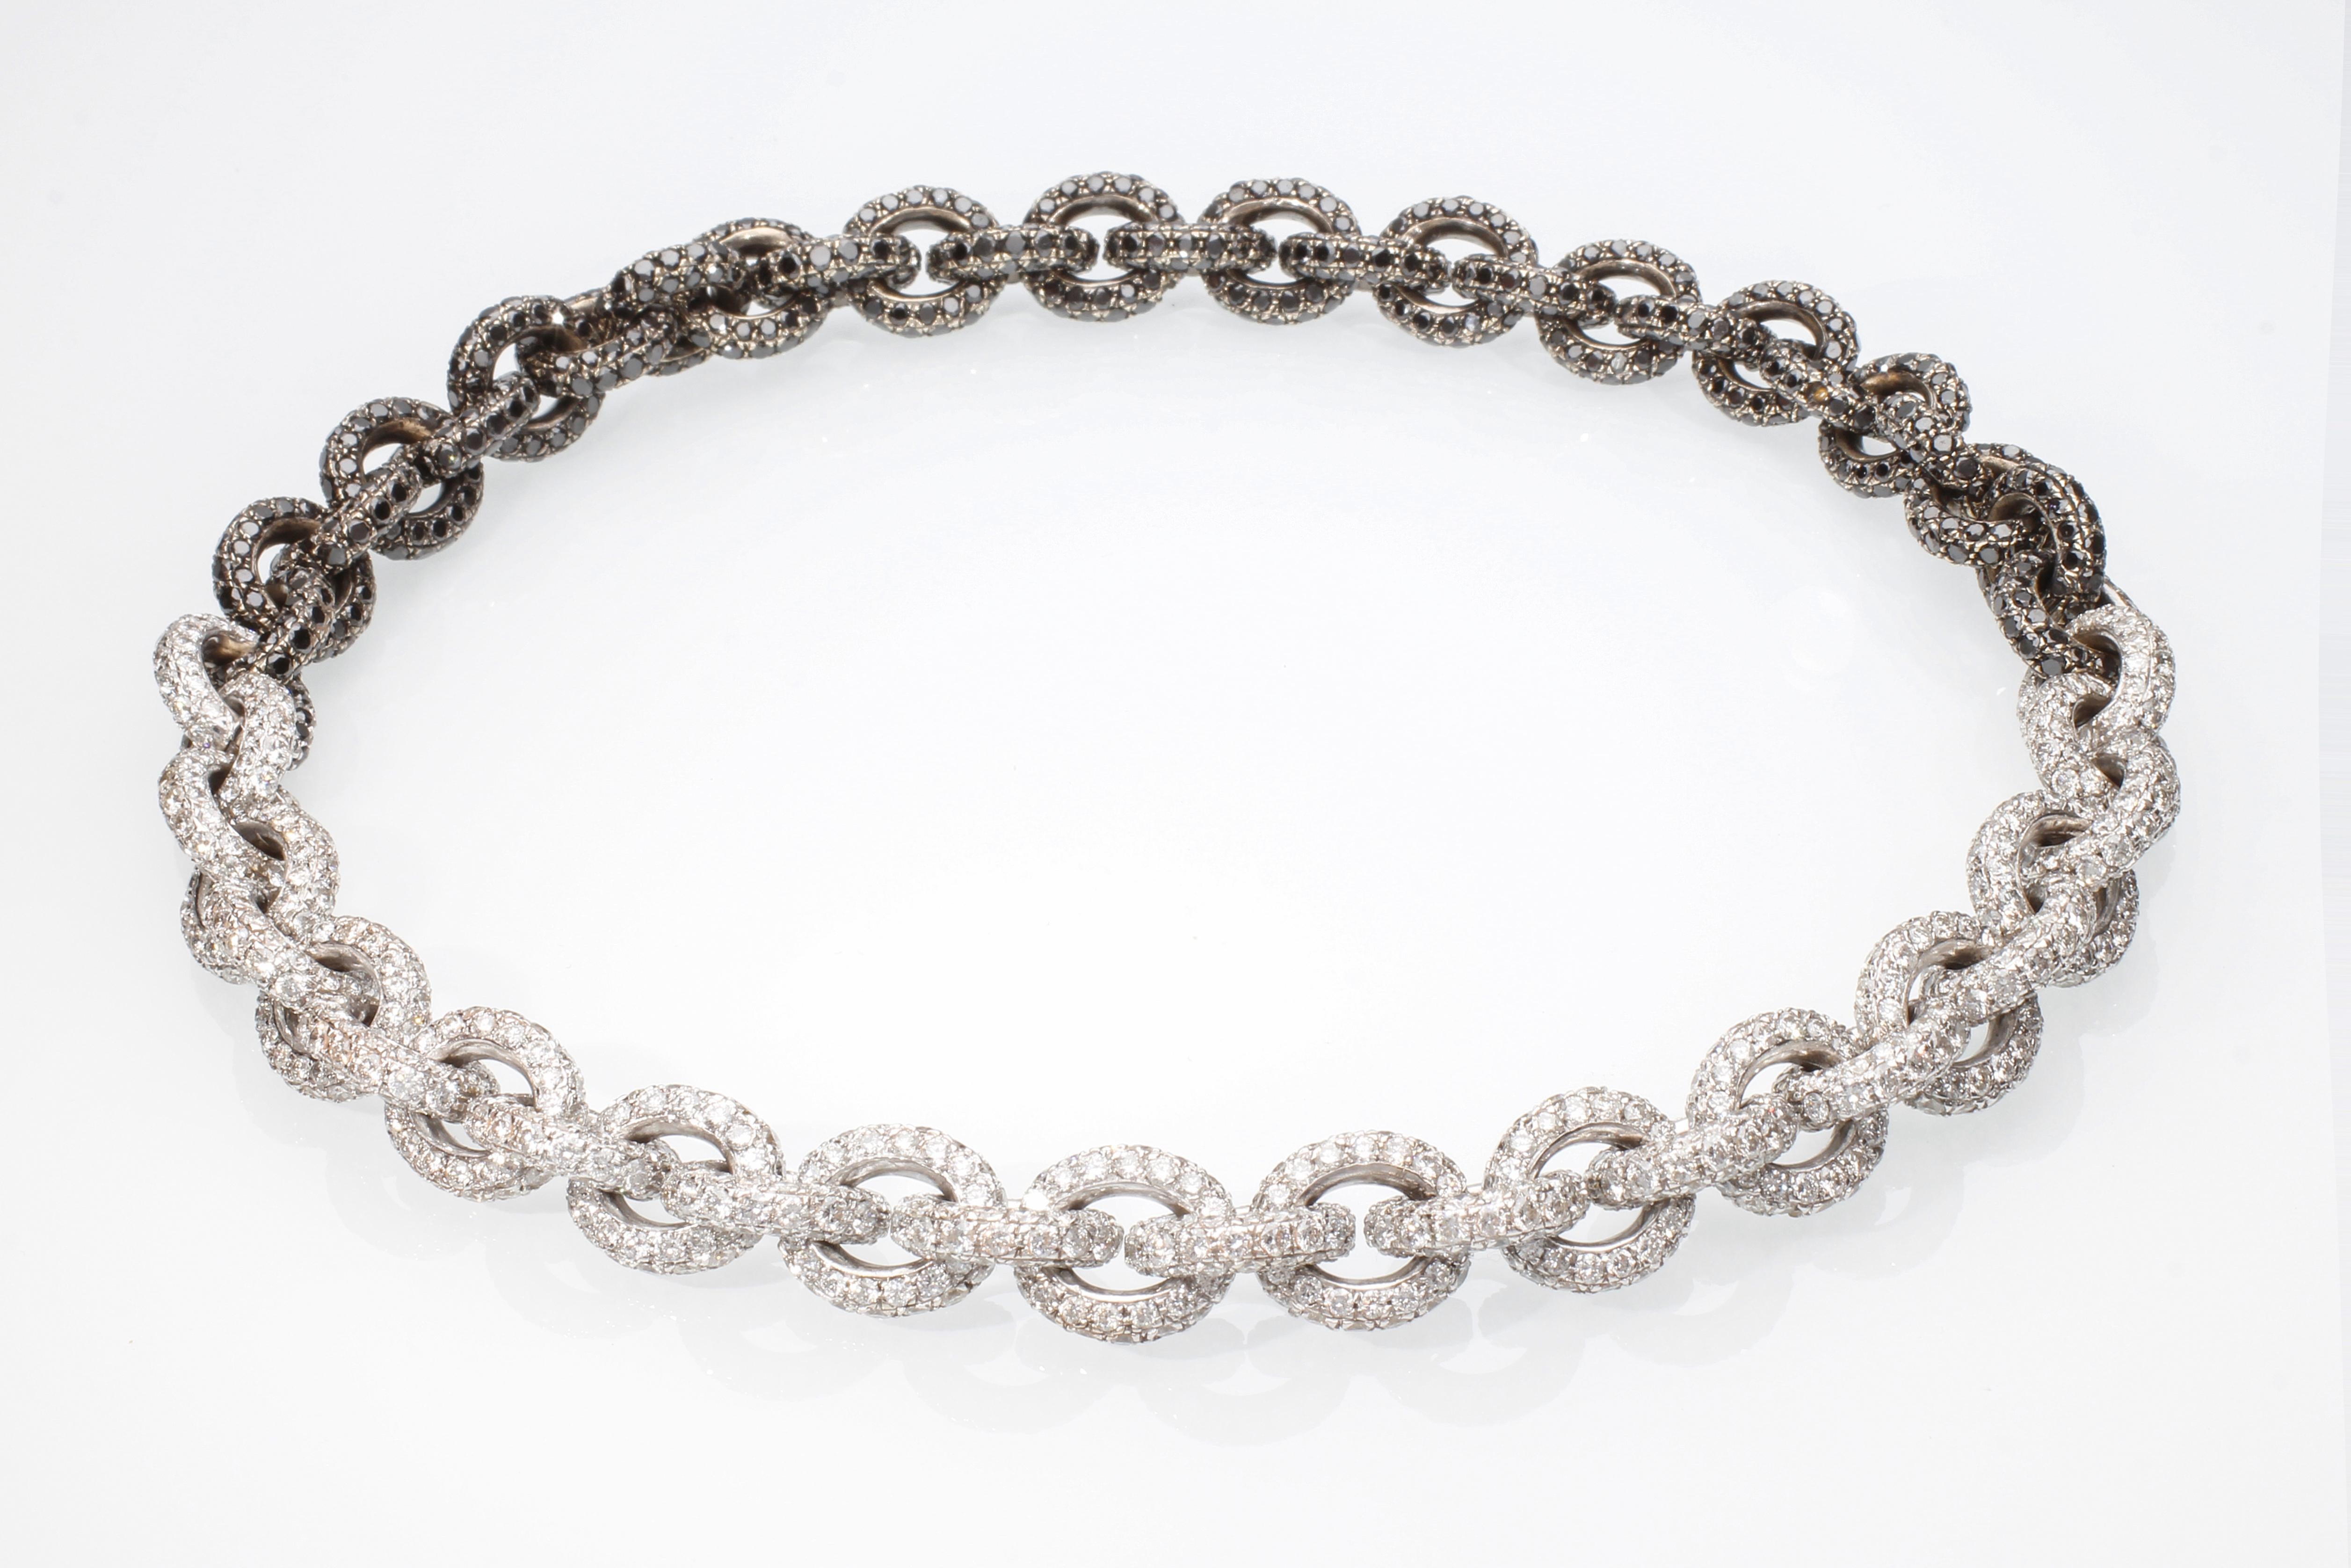 Women's or Men's Chain Necklace/Bracelet with 64.26 Ct of White and Black Diamonds. Handmade. For Sale